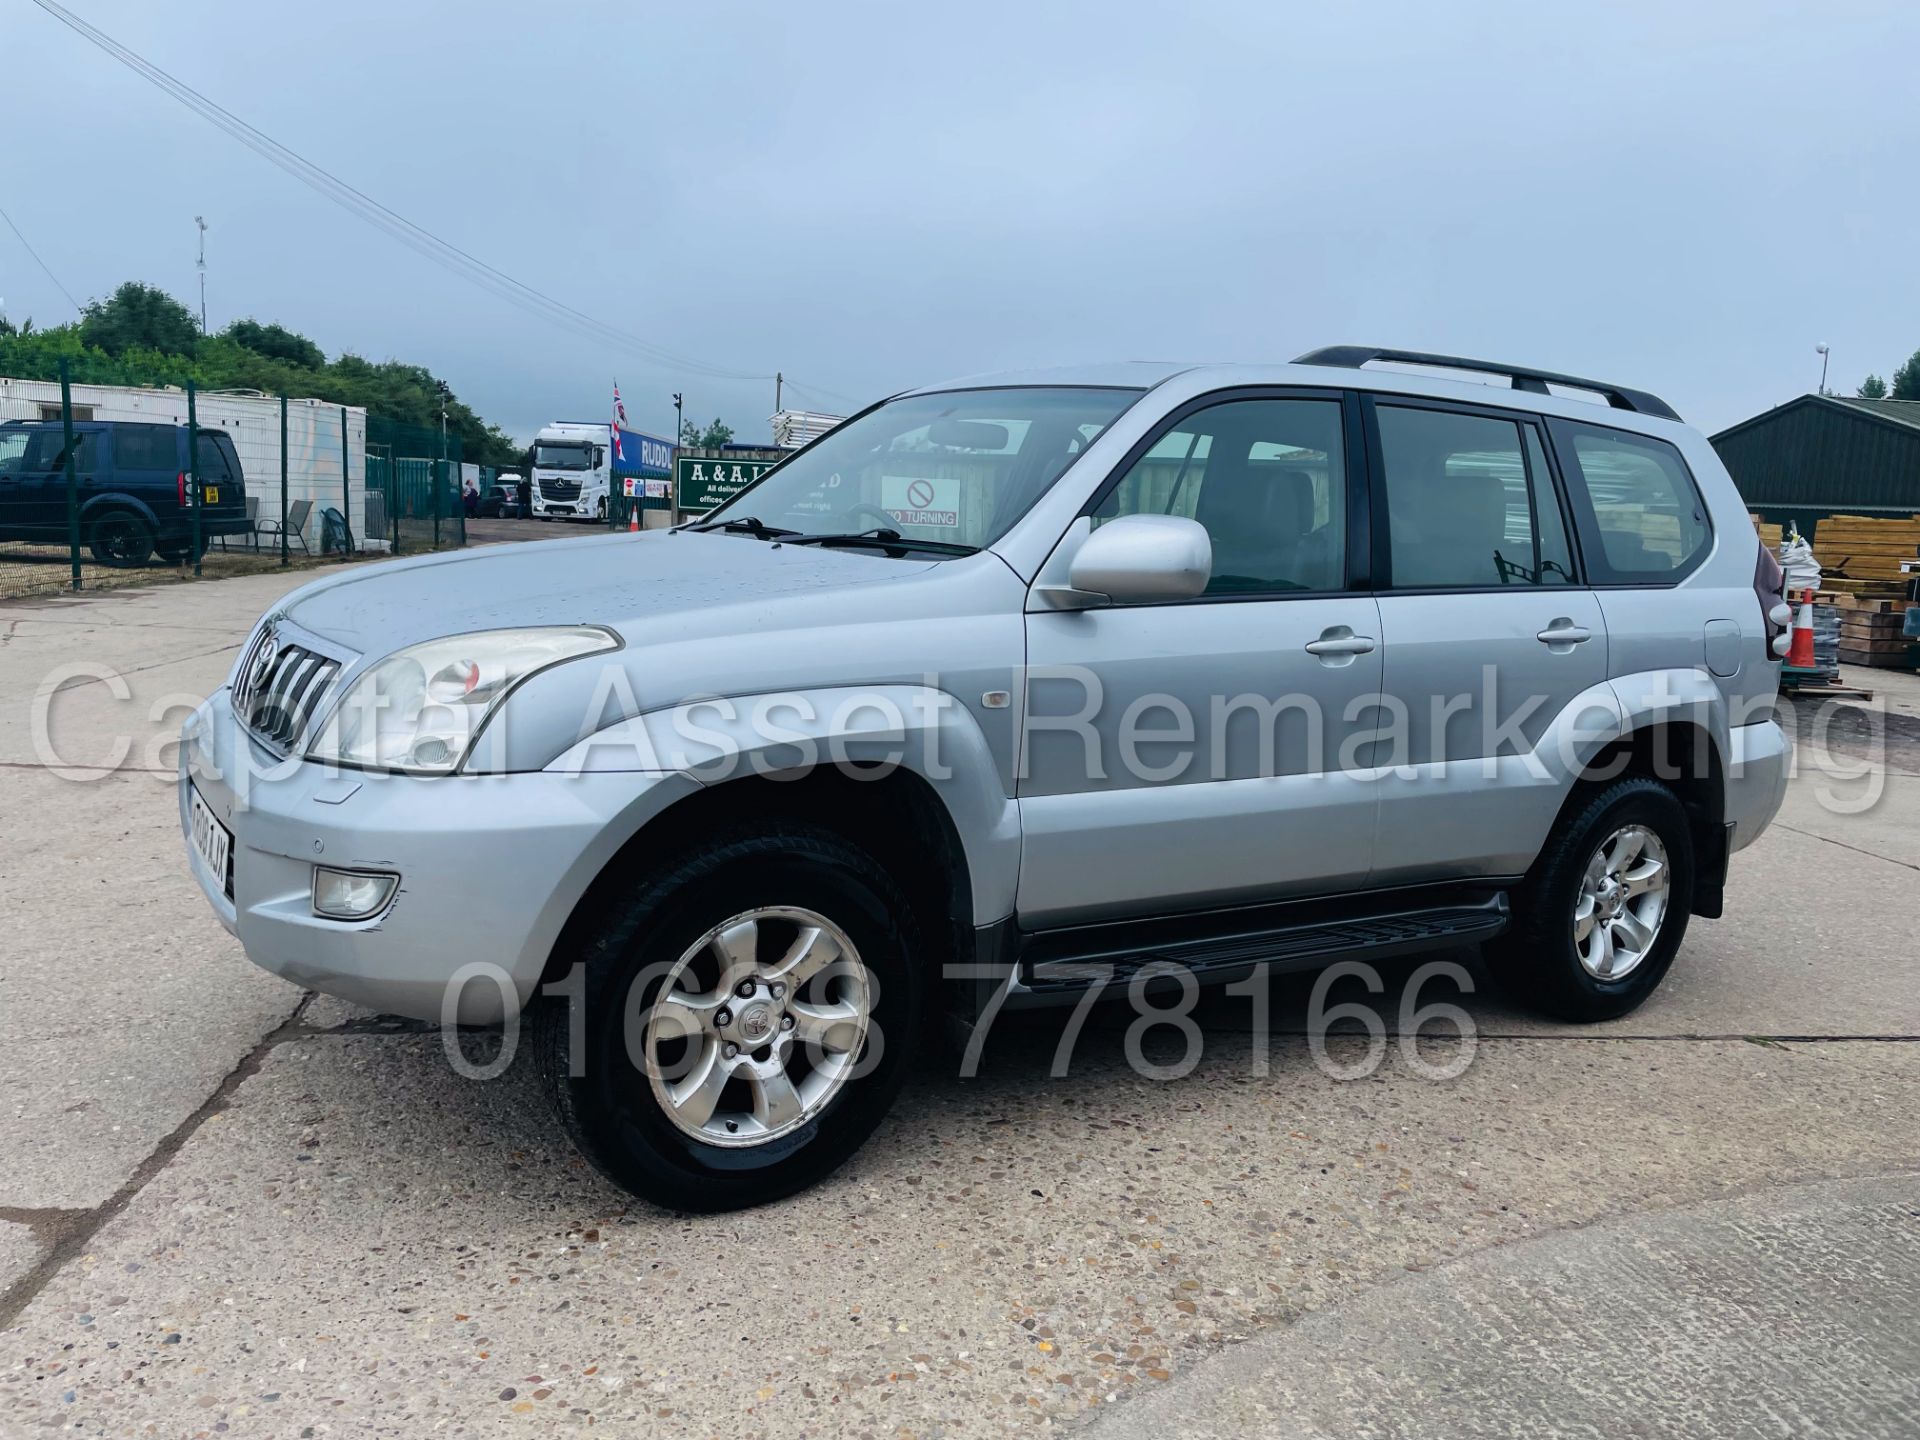 (On Sale) TOYOTA LAND CRUISER *LC4 EDITION* 8 SEATER SUV (2008) '3.0 D-4D-AUTO' *HUGE SPEC* (NO VAT) - Image 7 of 56